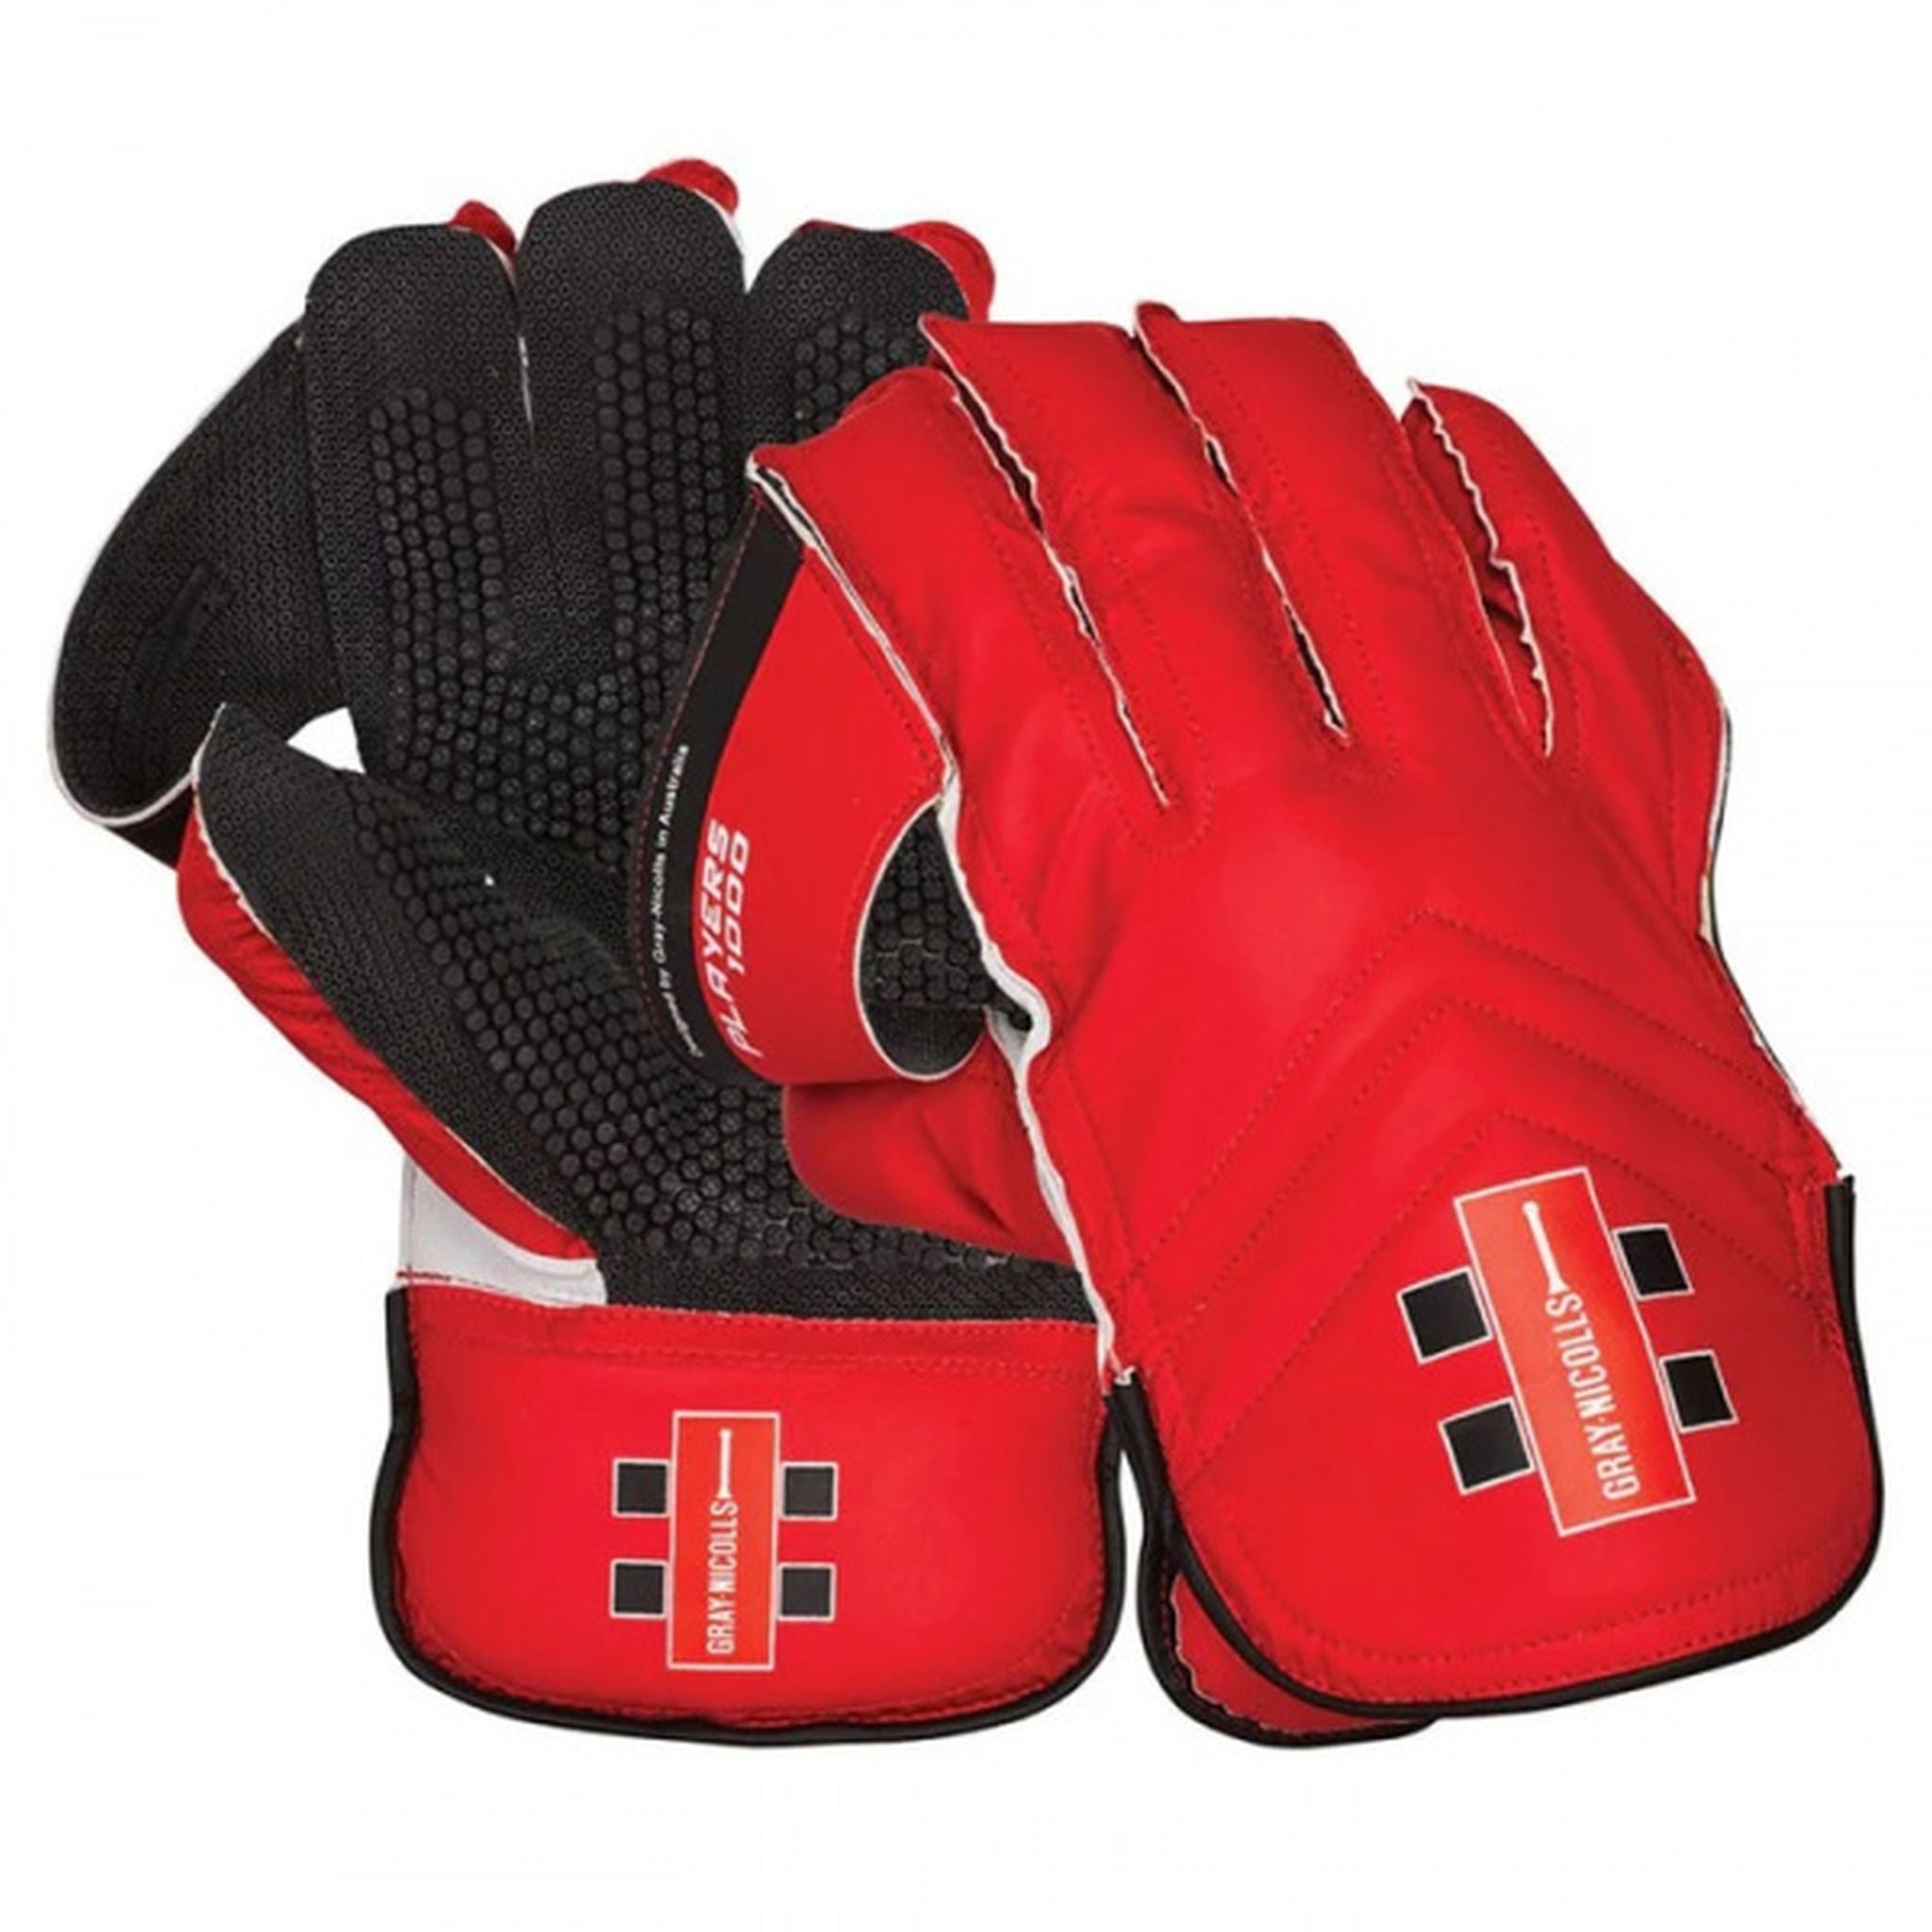 Gray-Nicolls Players 1000 Adult Wicket Keeping Gloves